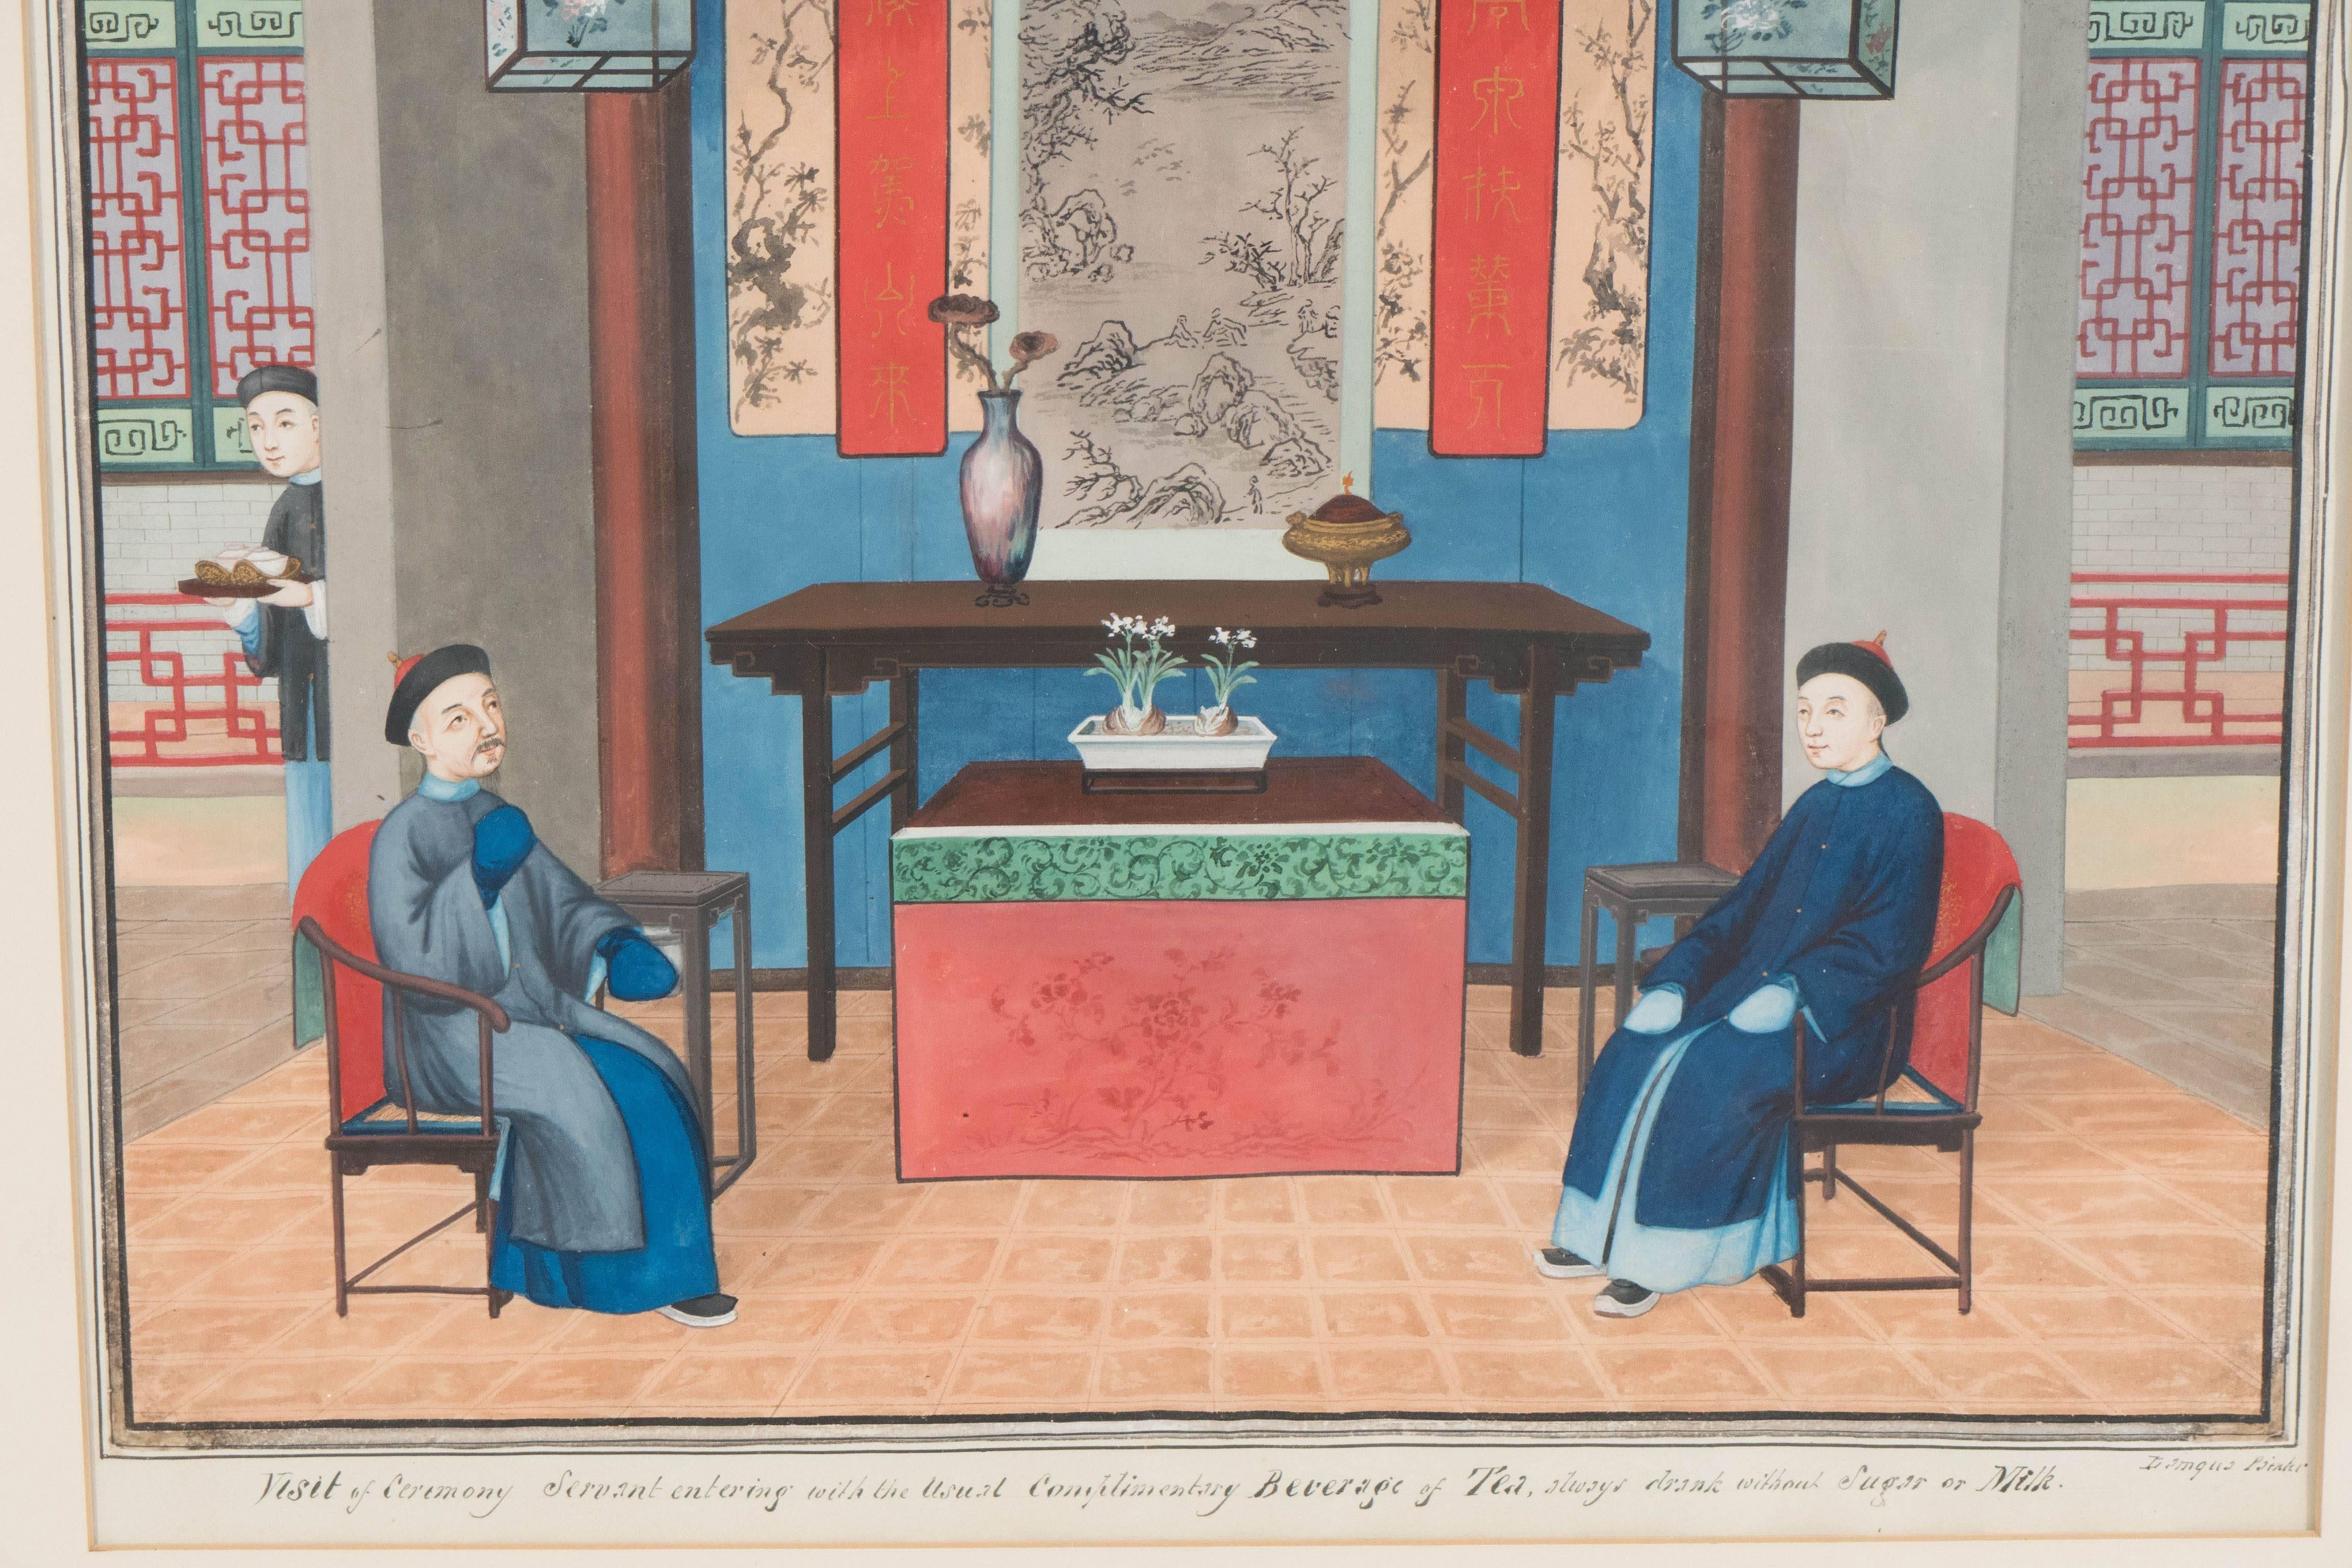 This Chinese watercolor and gouache painting, produced within the mid-19th century Qing period by artist Lamqua (Lam-Qua), depicts two gentlemen conversing within a beautifully furnished interior, moments before a servant enters the room with tea.